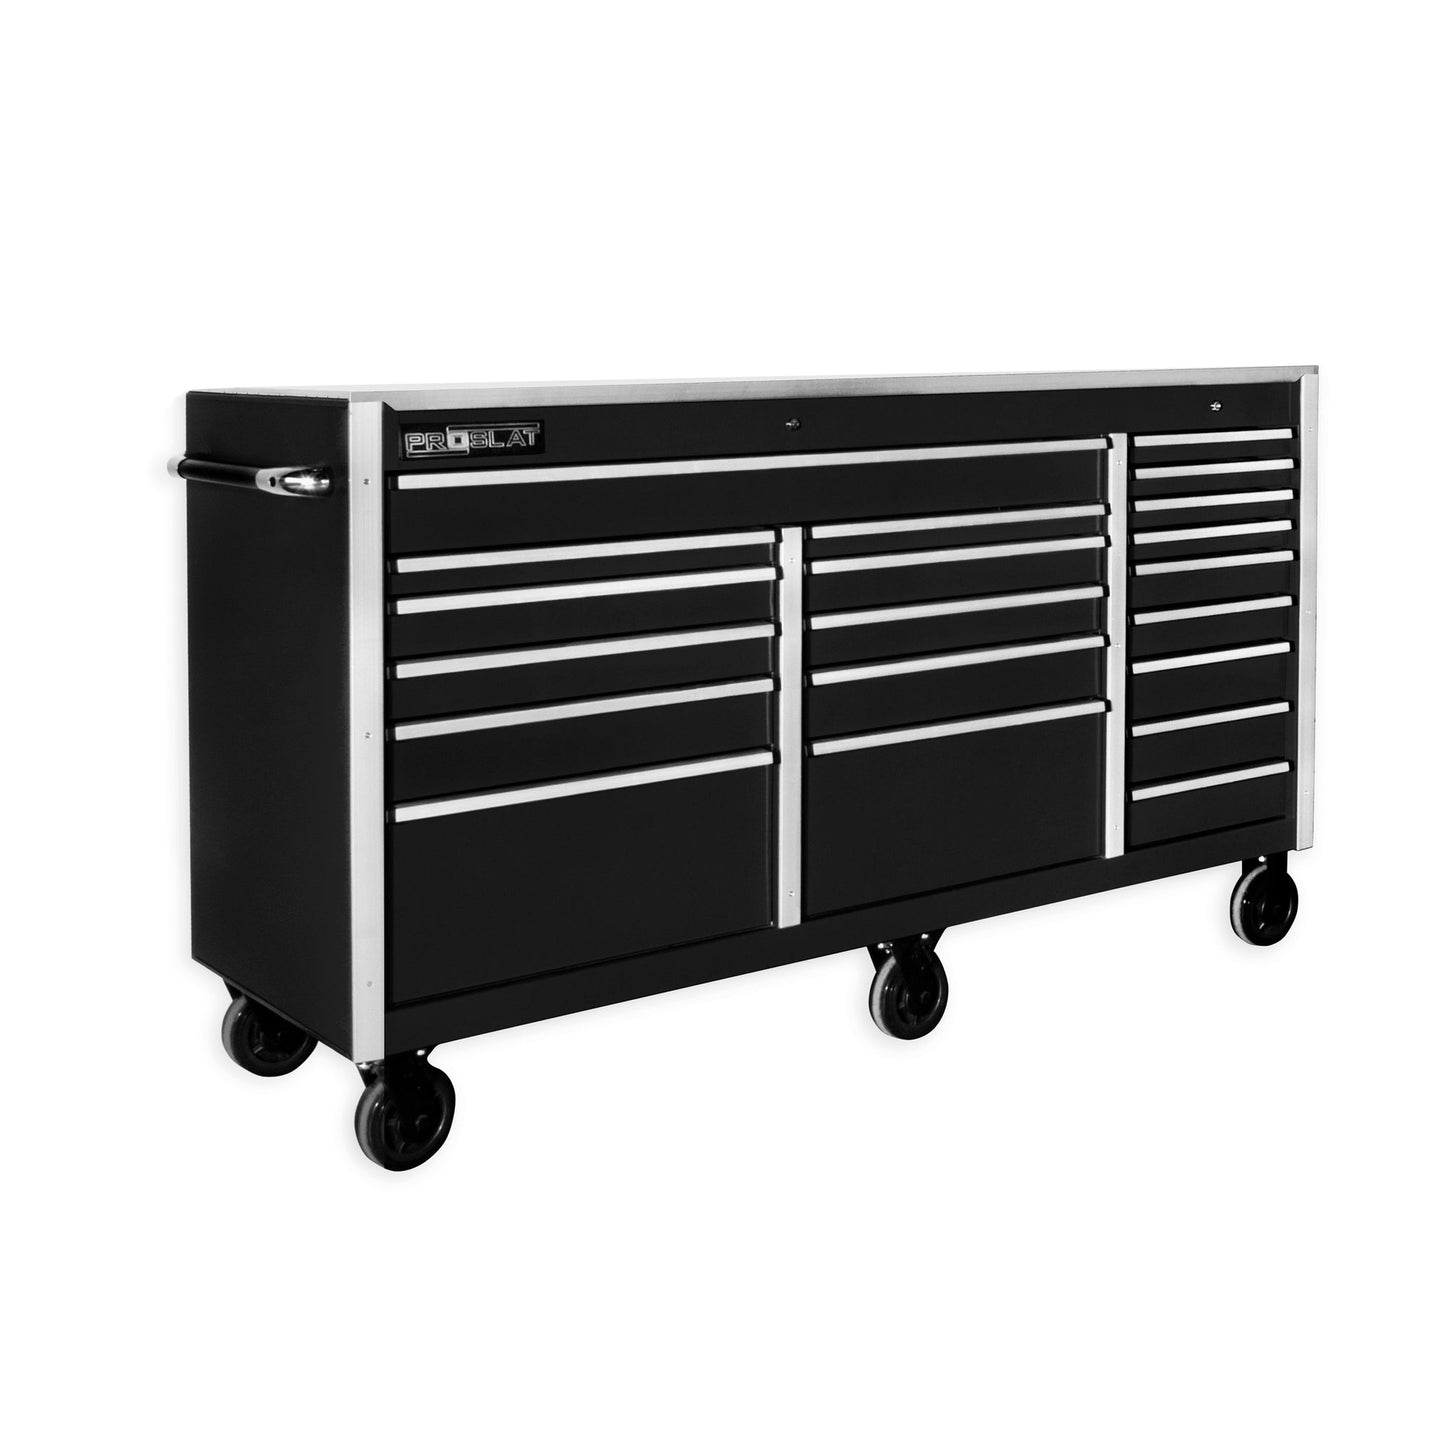 MCS 72.5 in. Rolling tool chest - Black